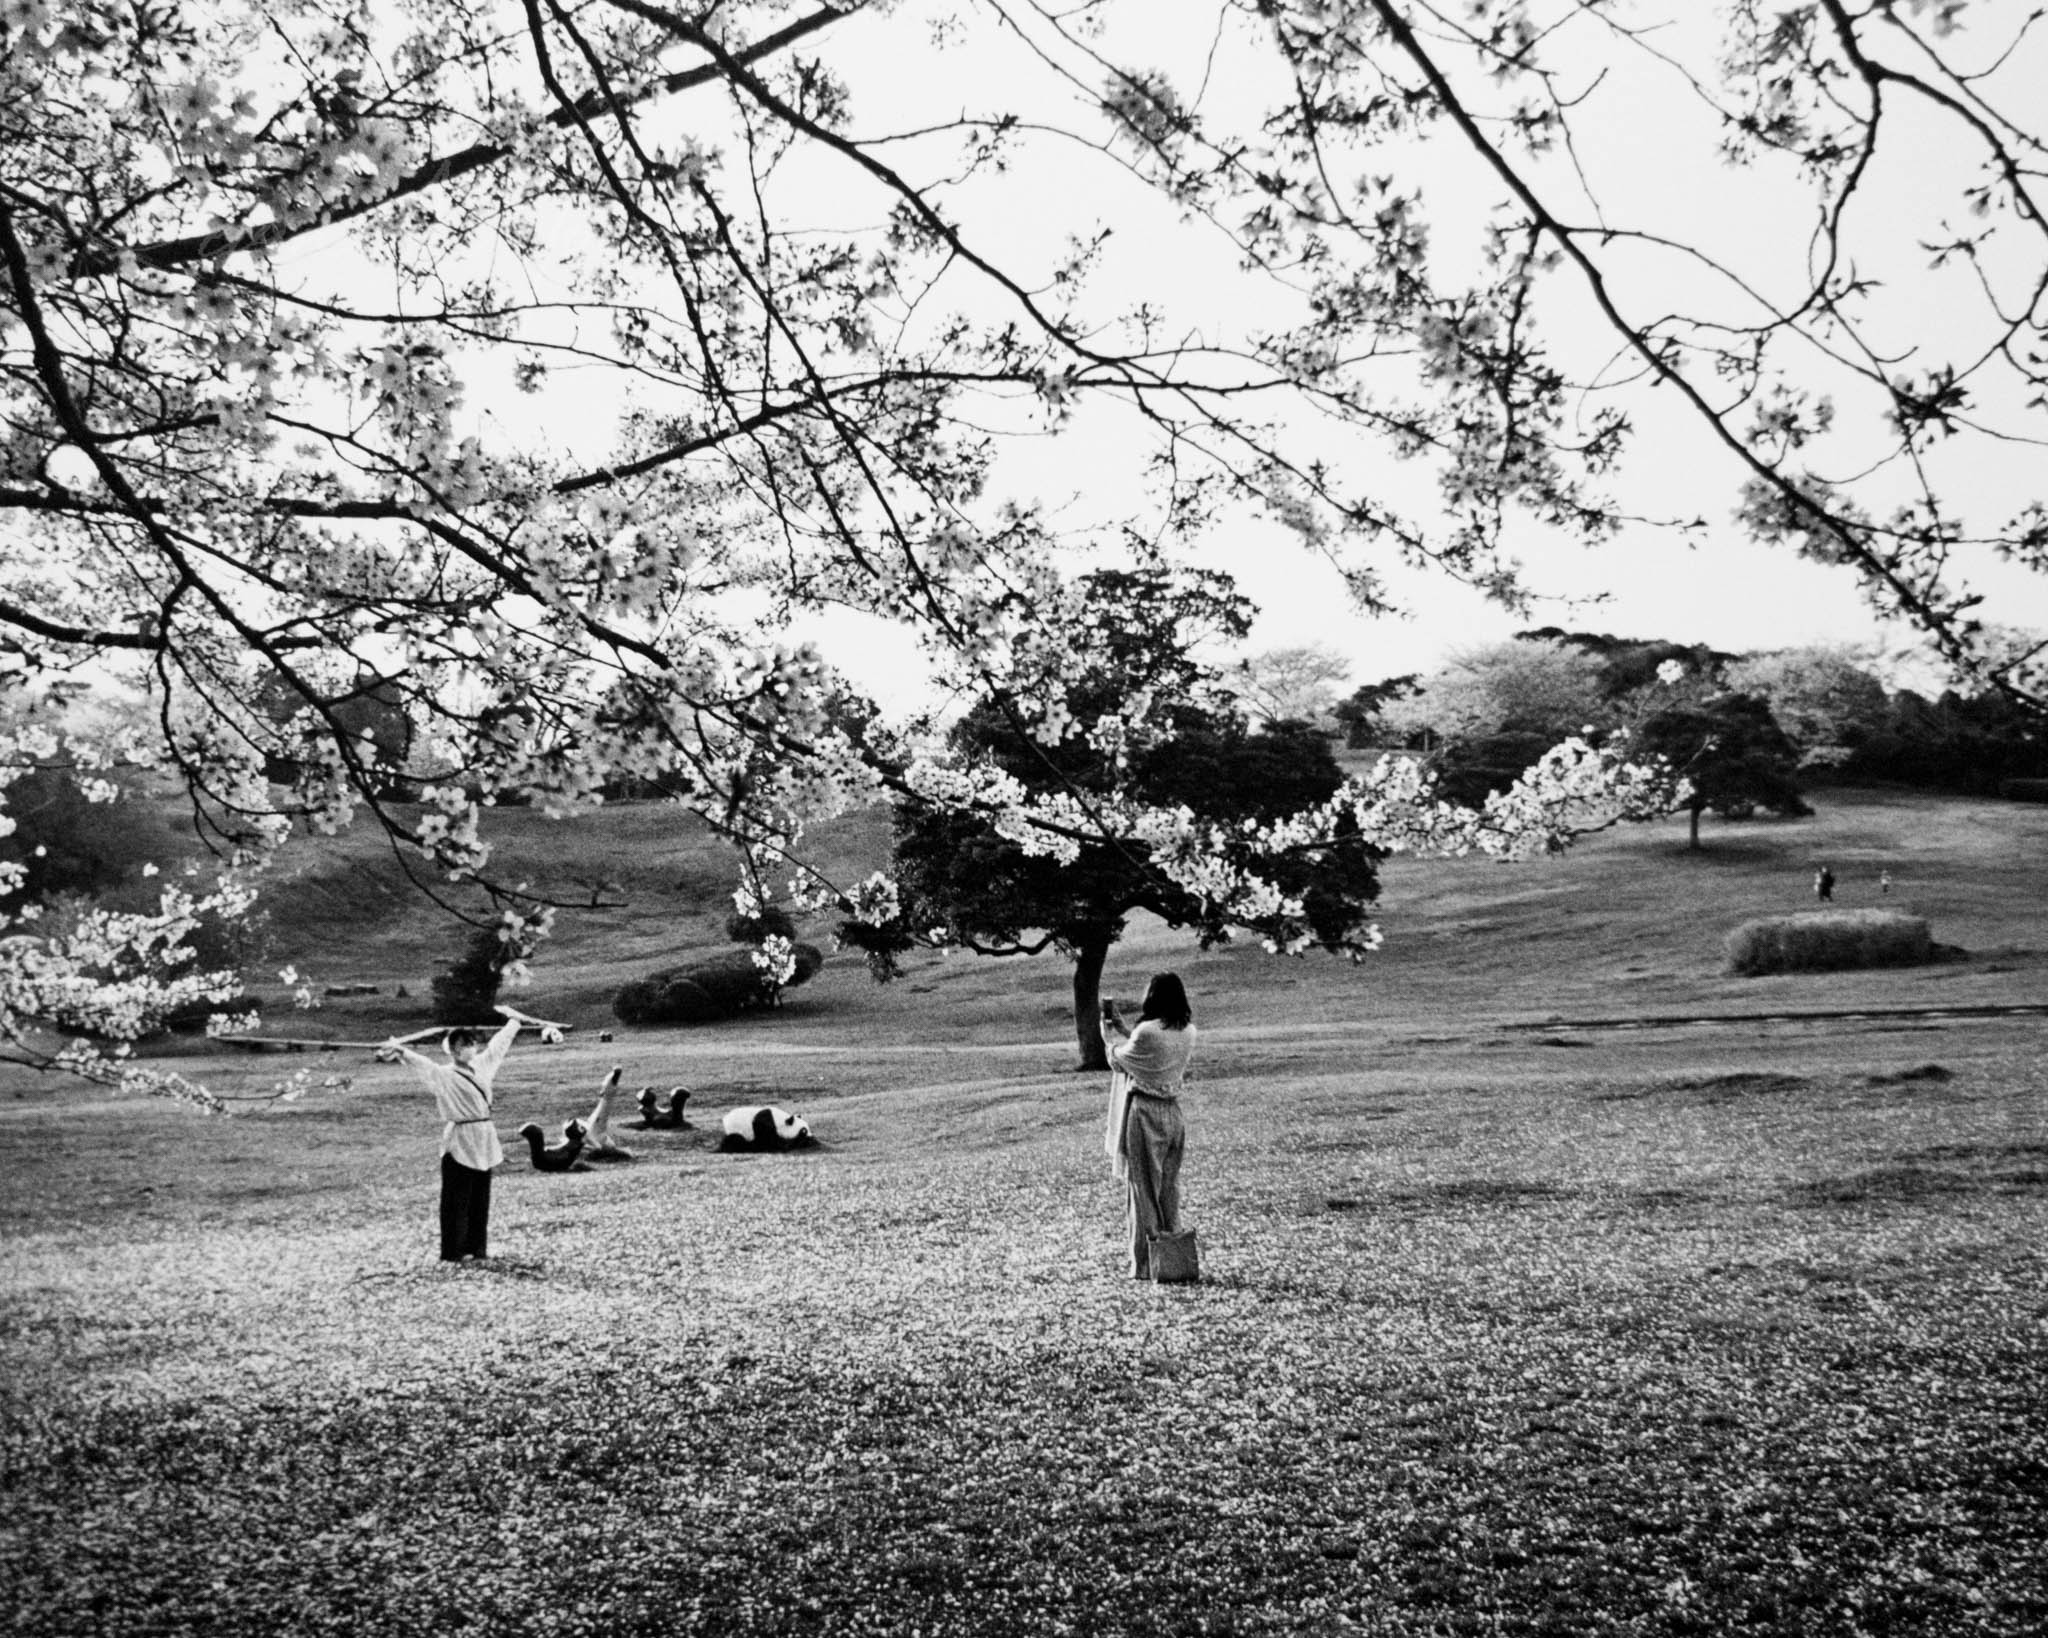 Black and white image of peaceful afternoon in a blossoming park with people enjoying leisure activities.